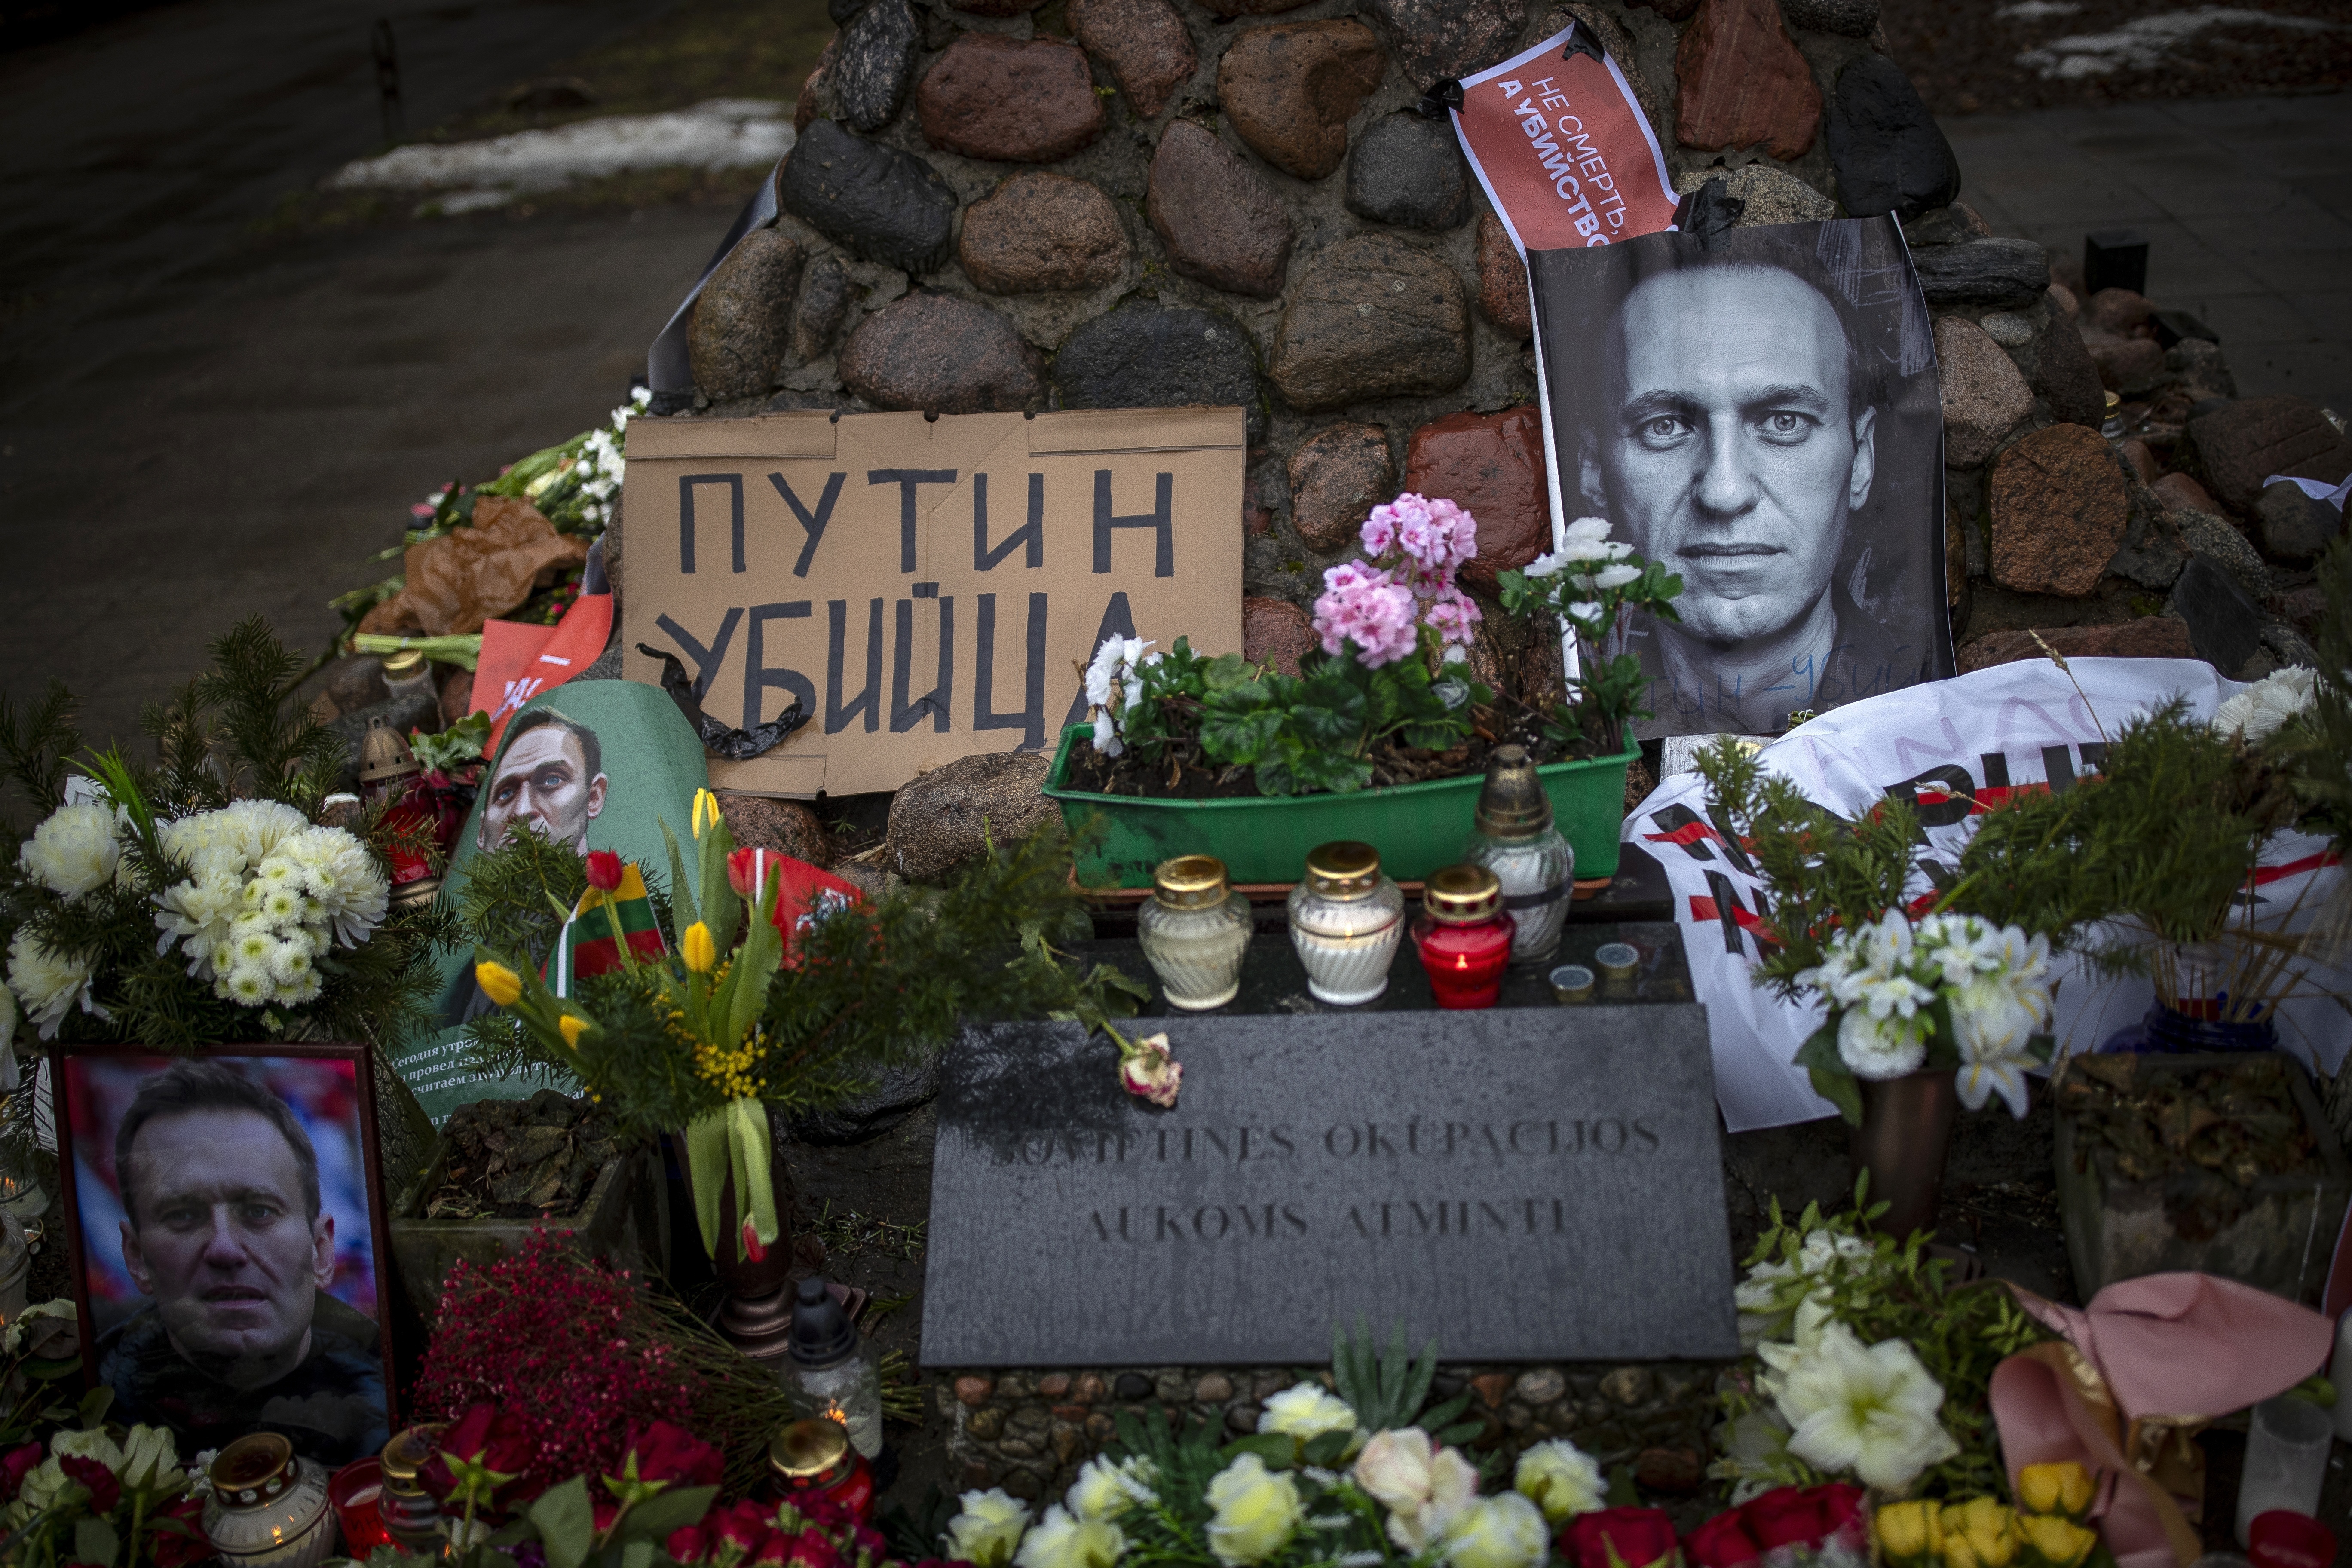 Tribute paid to Alexey Navalny in Russia (AP)